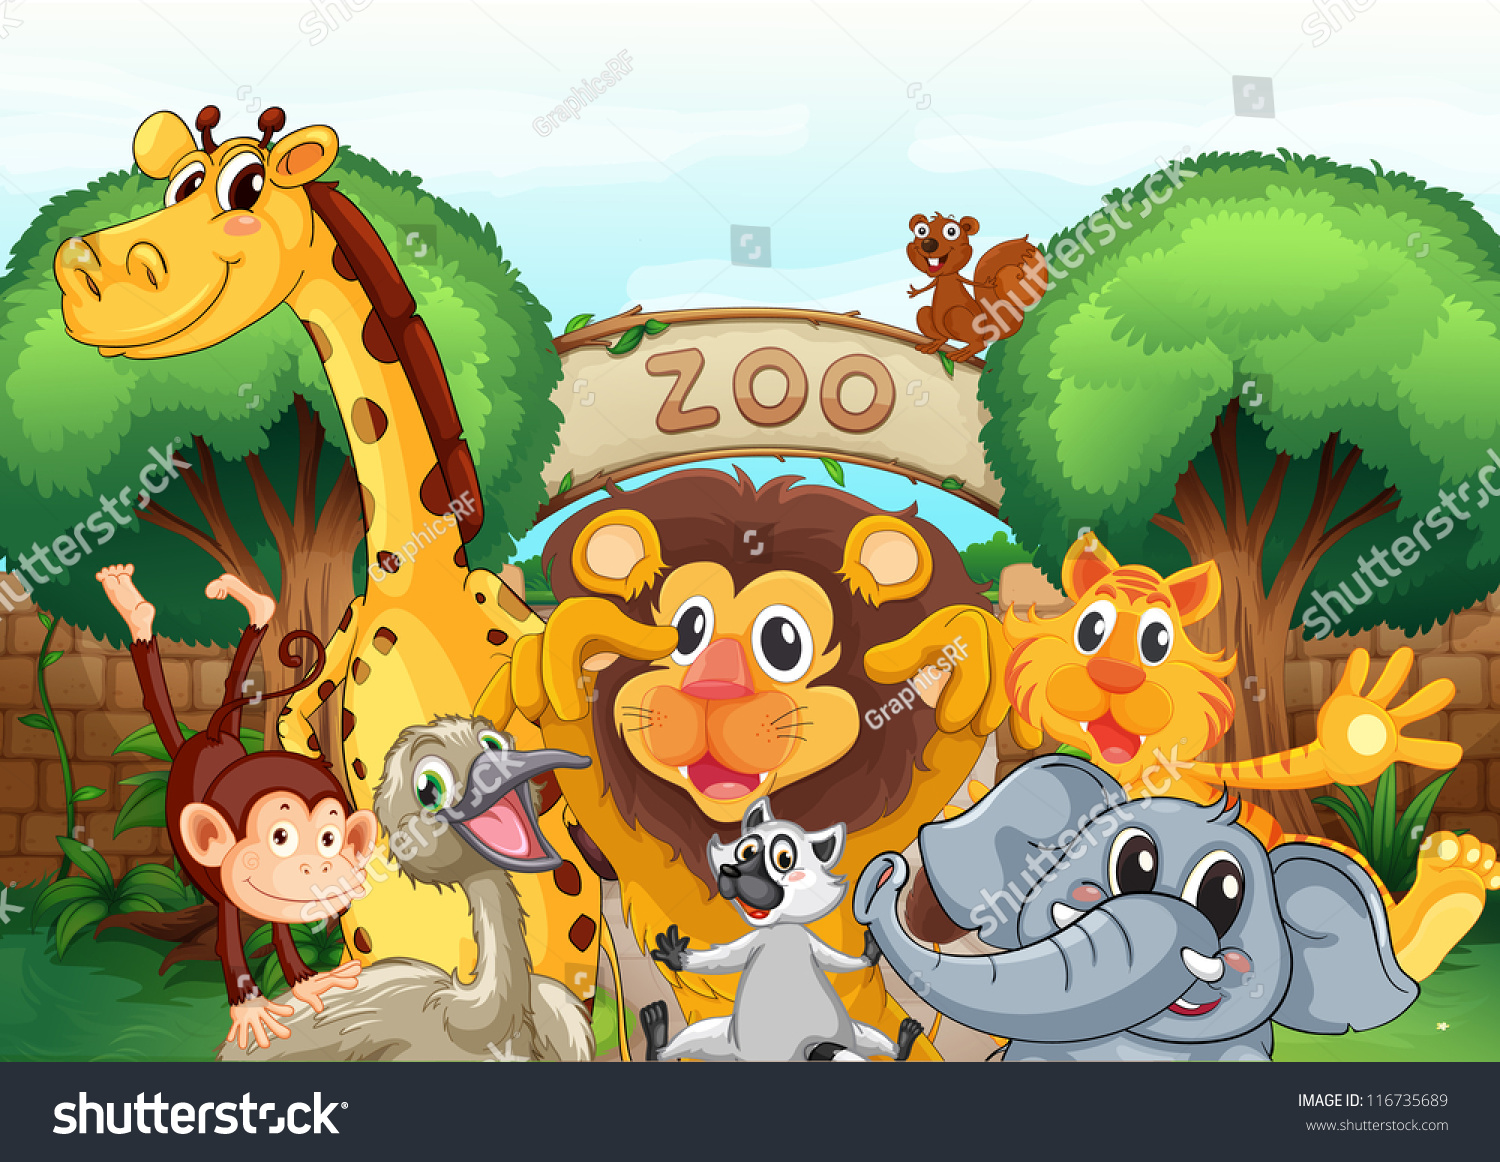 zoo clipart images - photo #26